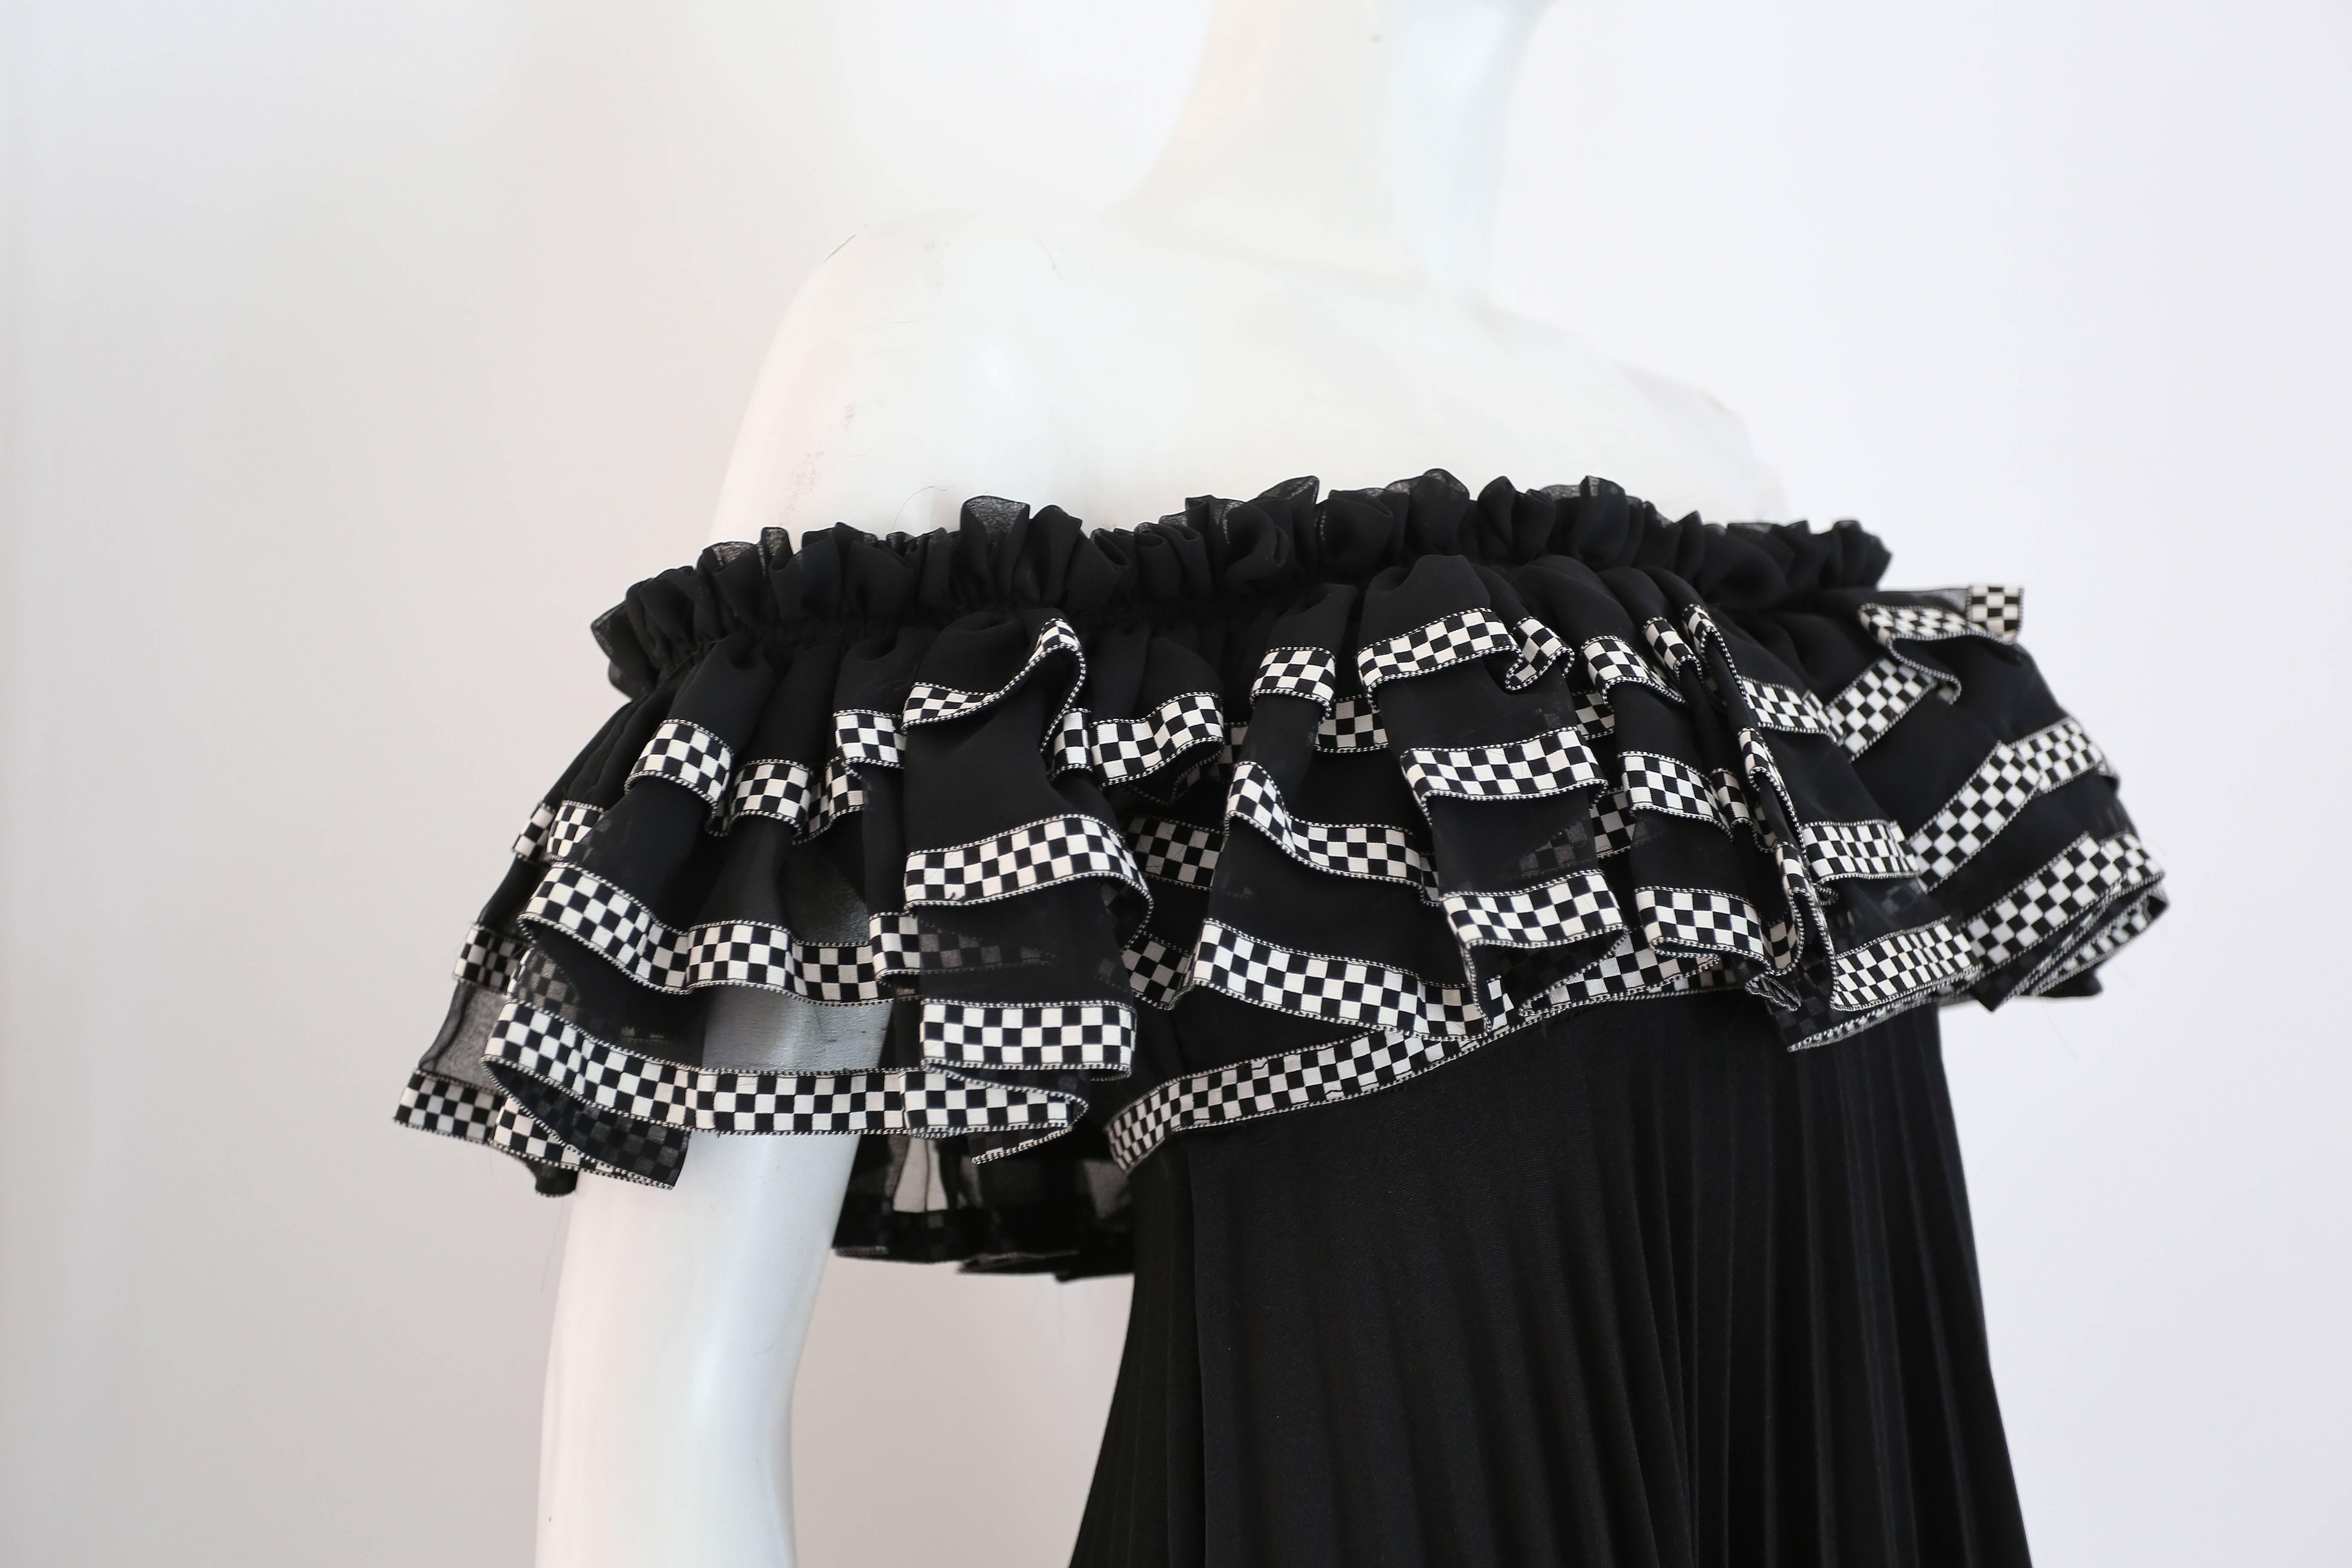 Black Jean Varon off the shoulder pleated empire evening gown, c. 1970s